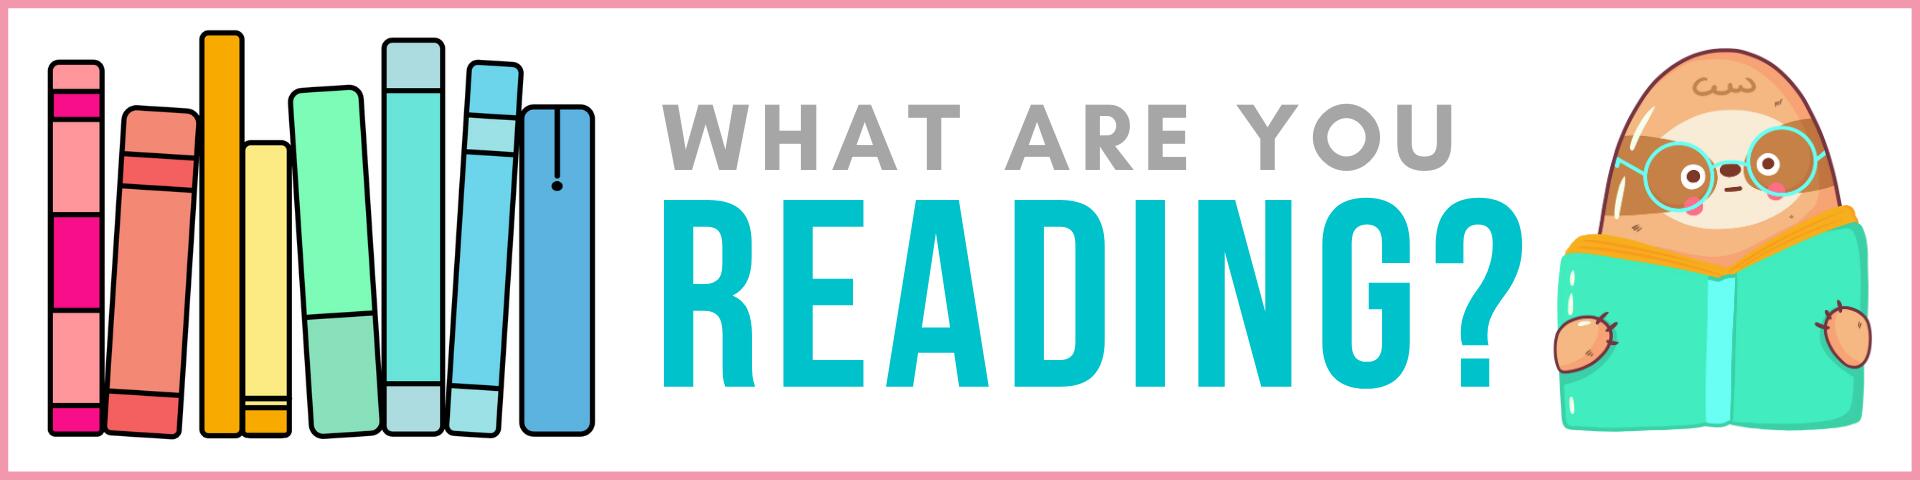 what are you reading